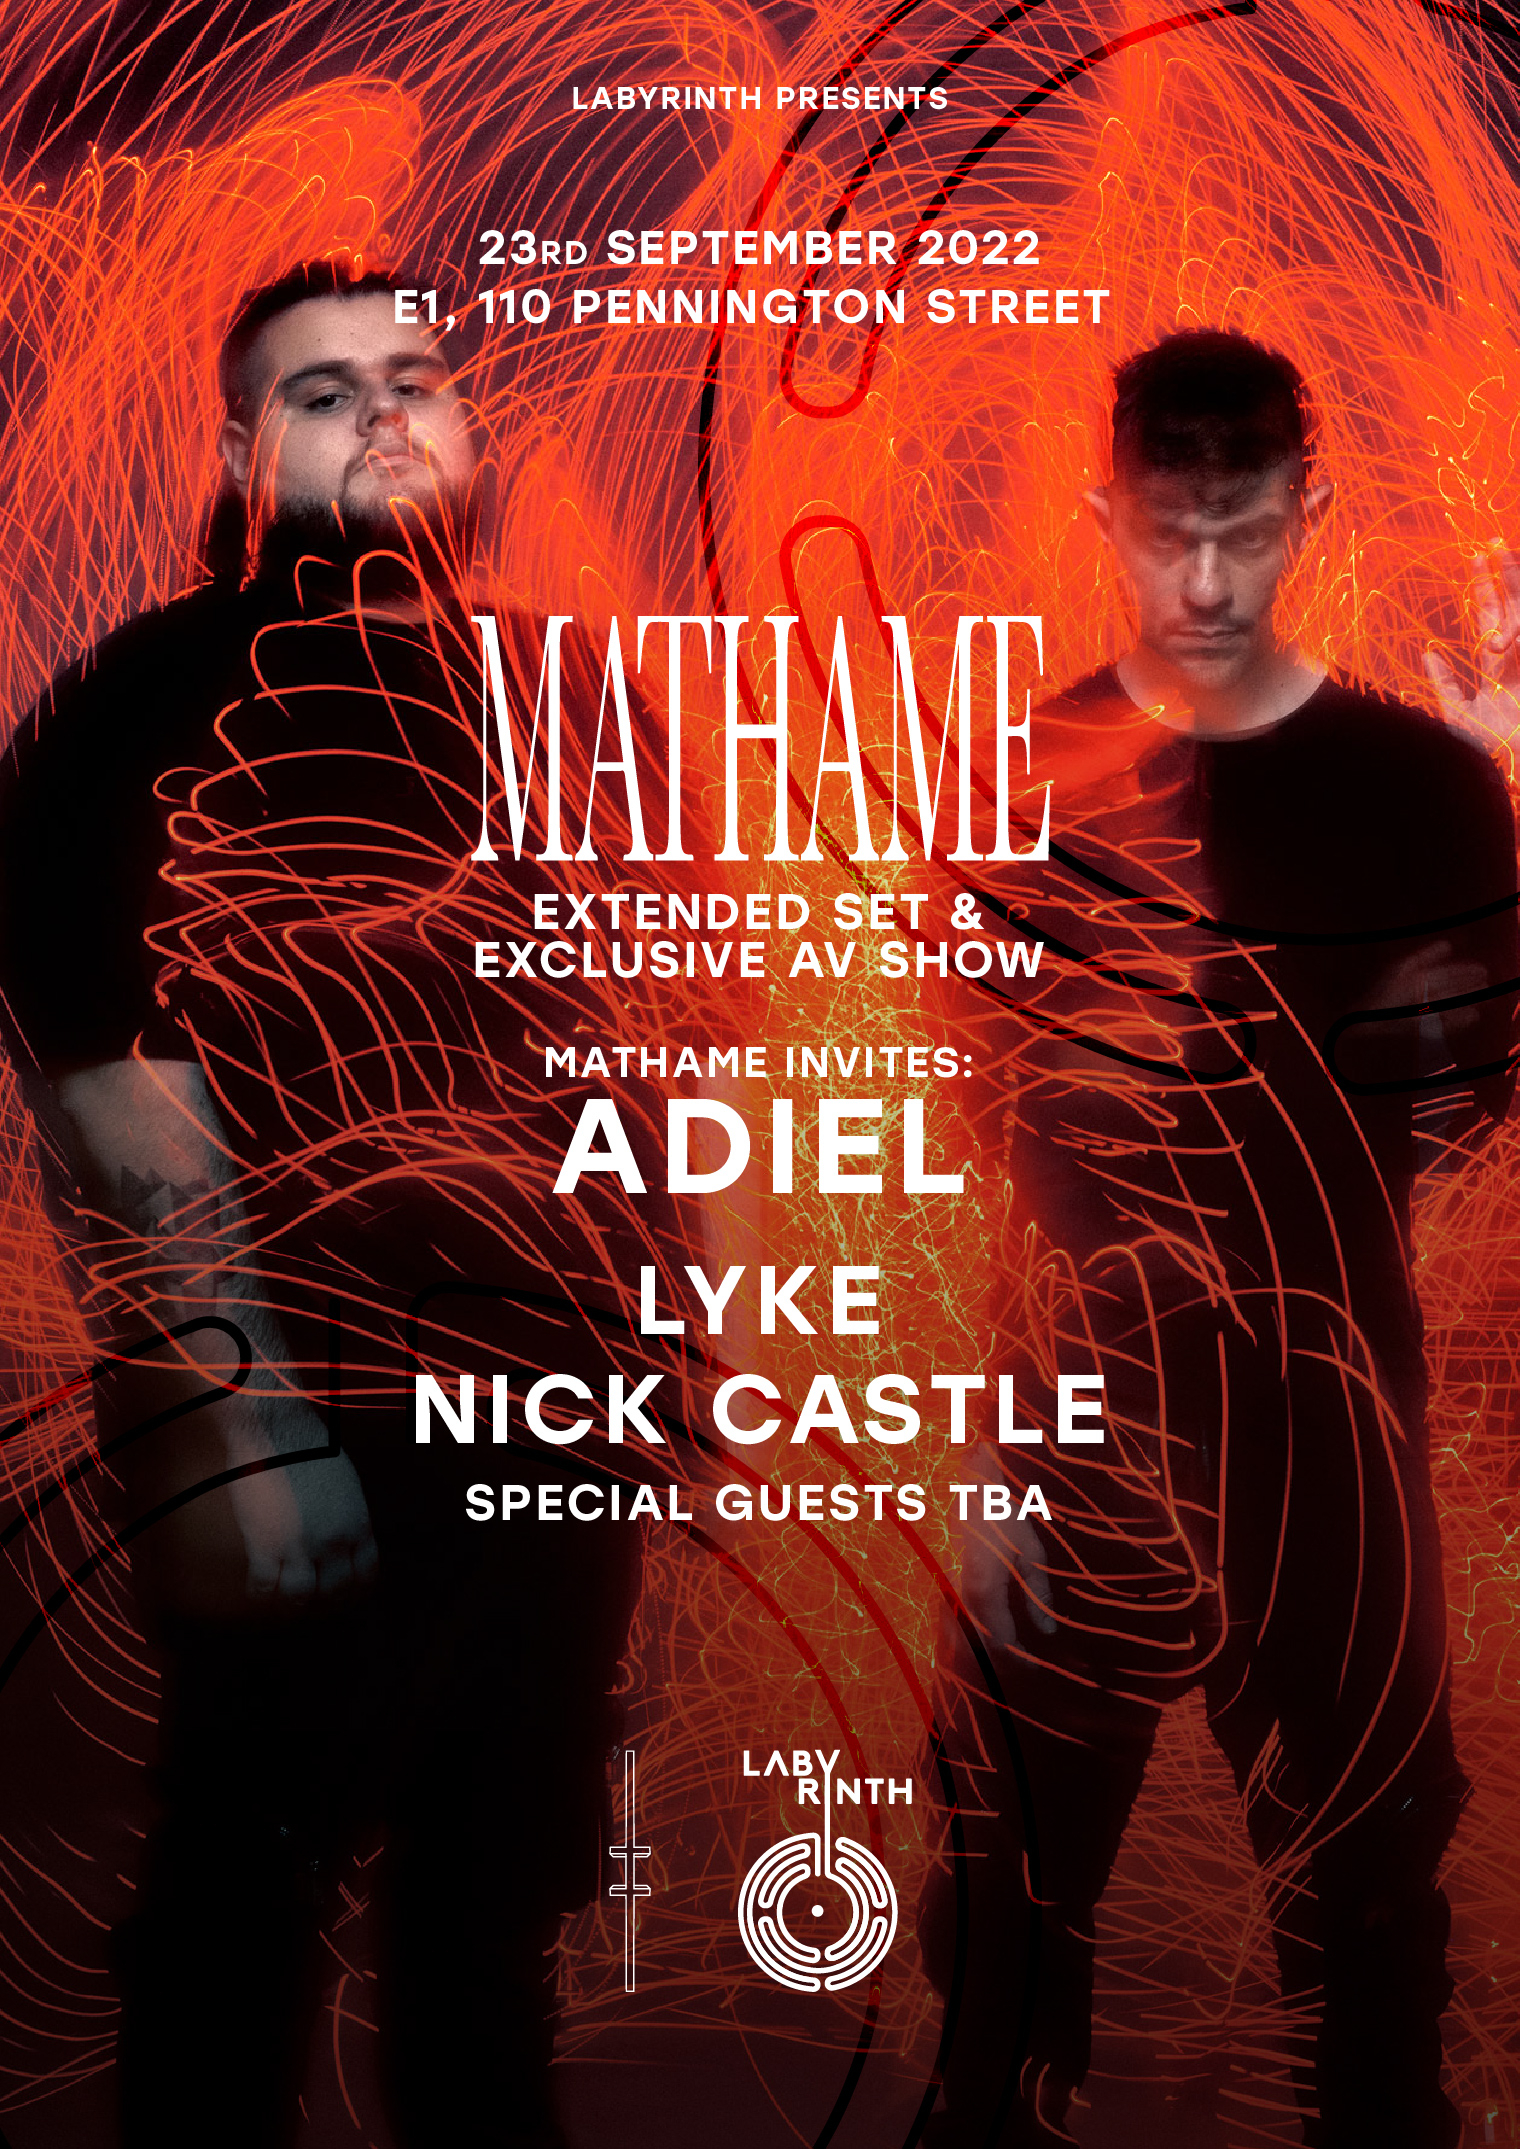 Labyrinth presents: Mathame Exclusive AV Show & 3 Hour Extended Set, Adiel, Lyke & More TBA - Flyer front